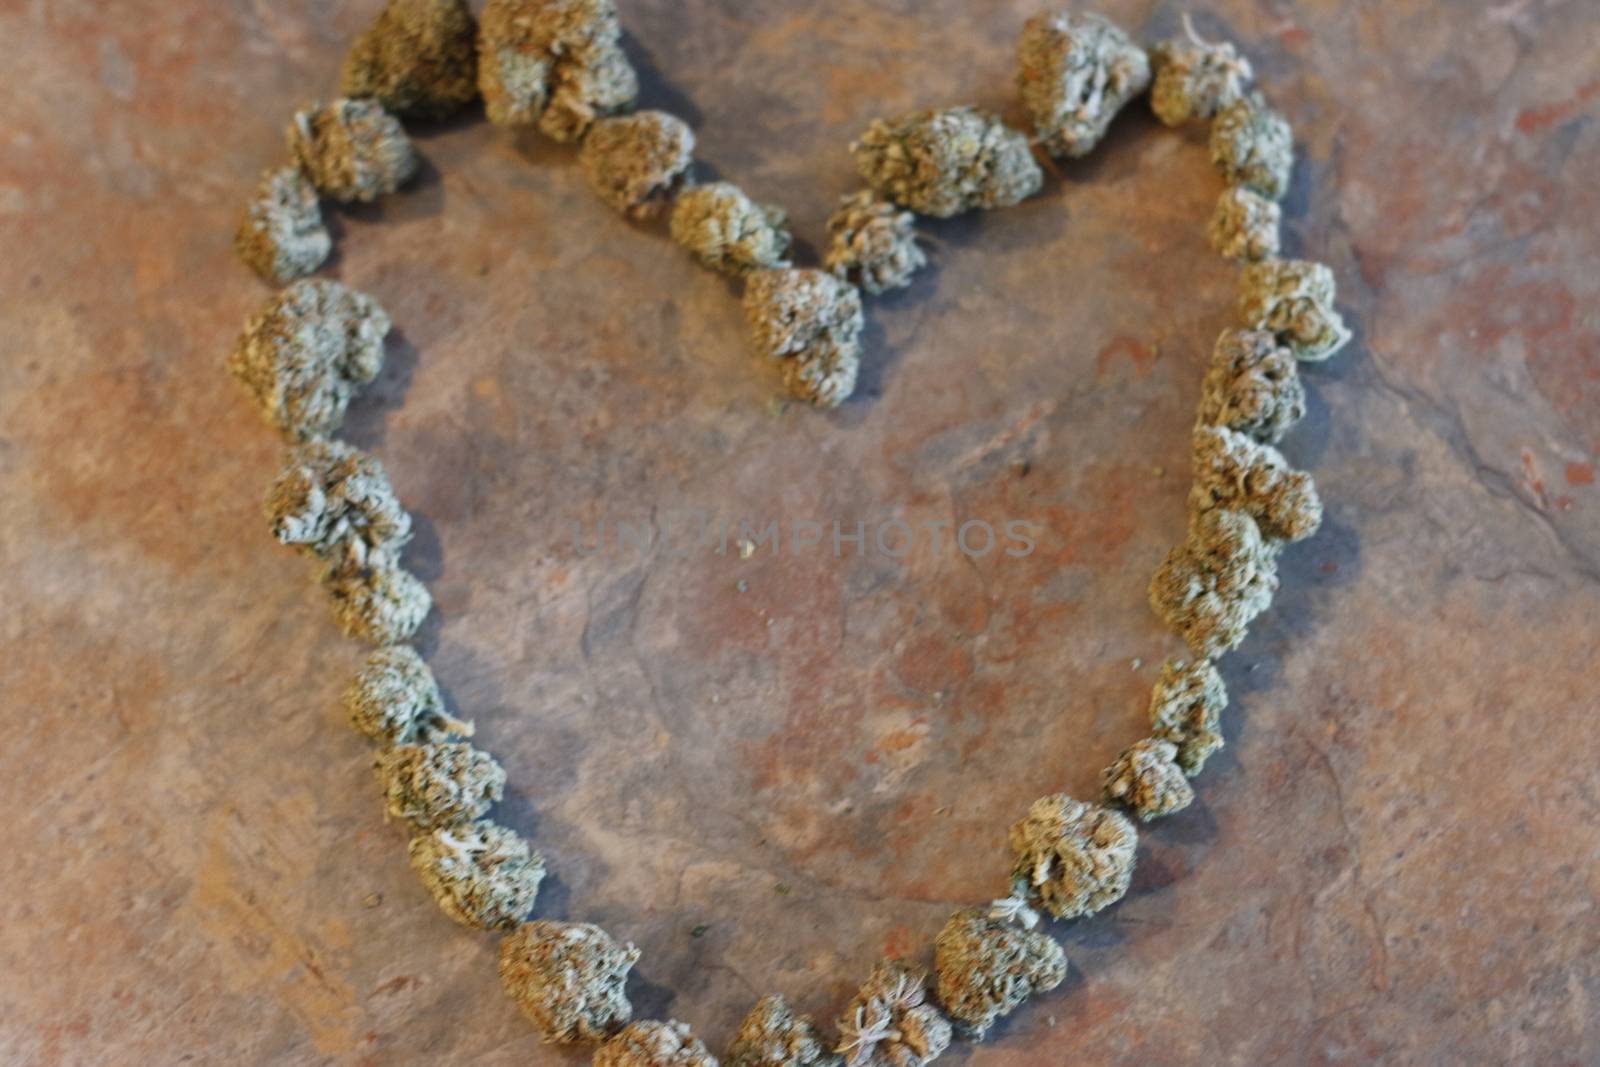 The shape of a heart made out of cannabis buds .